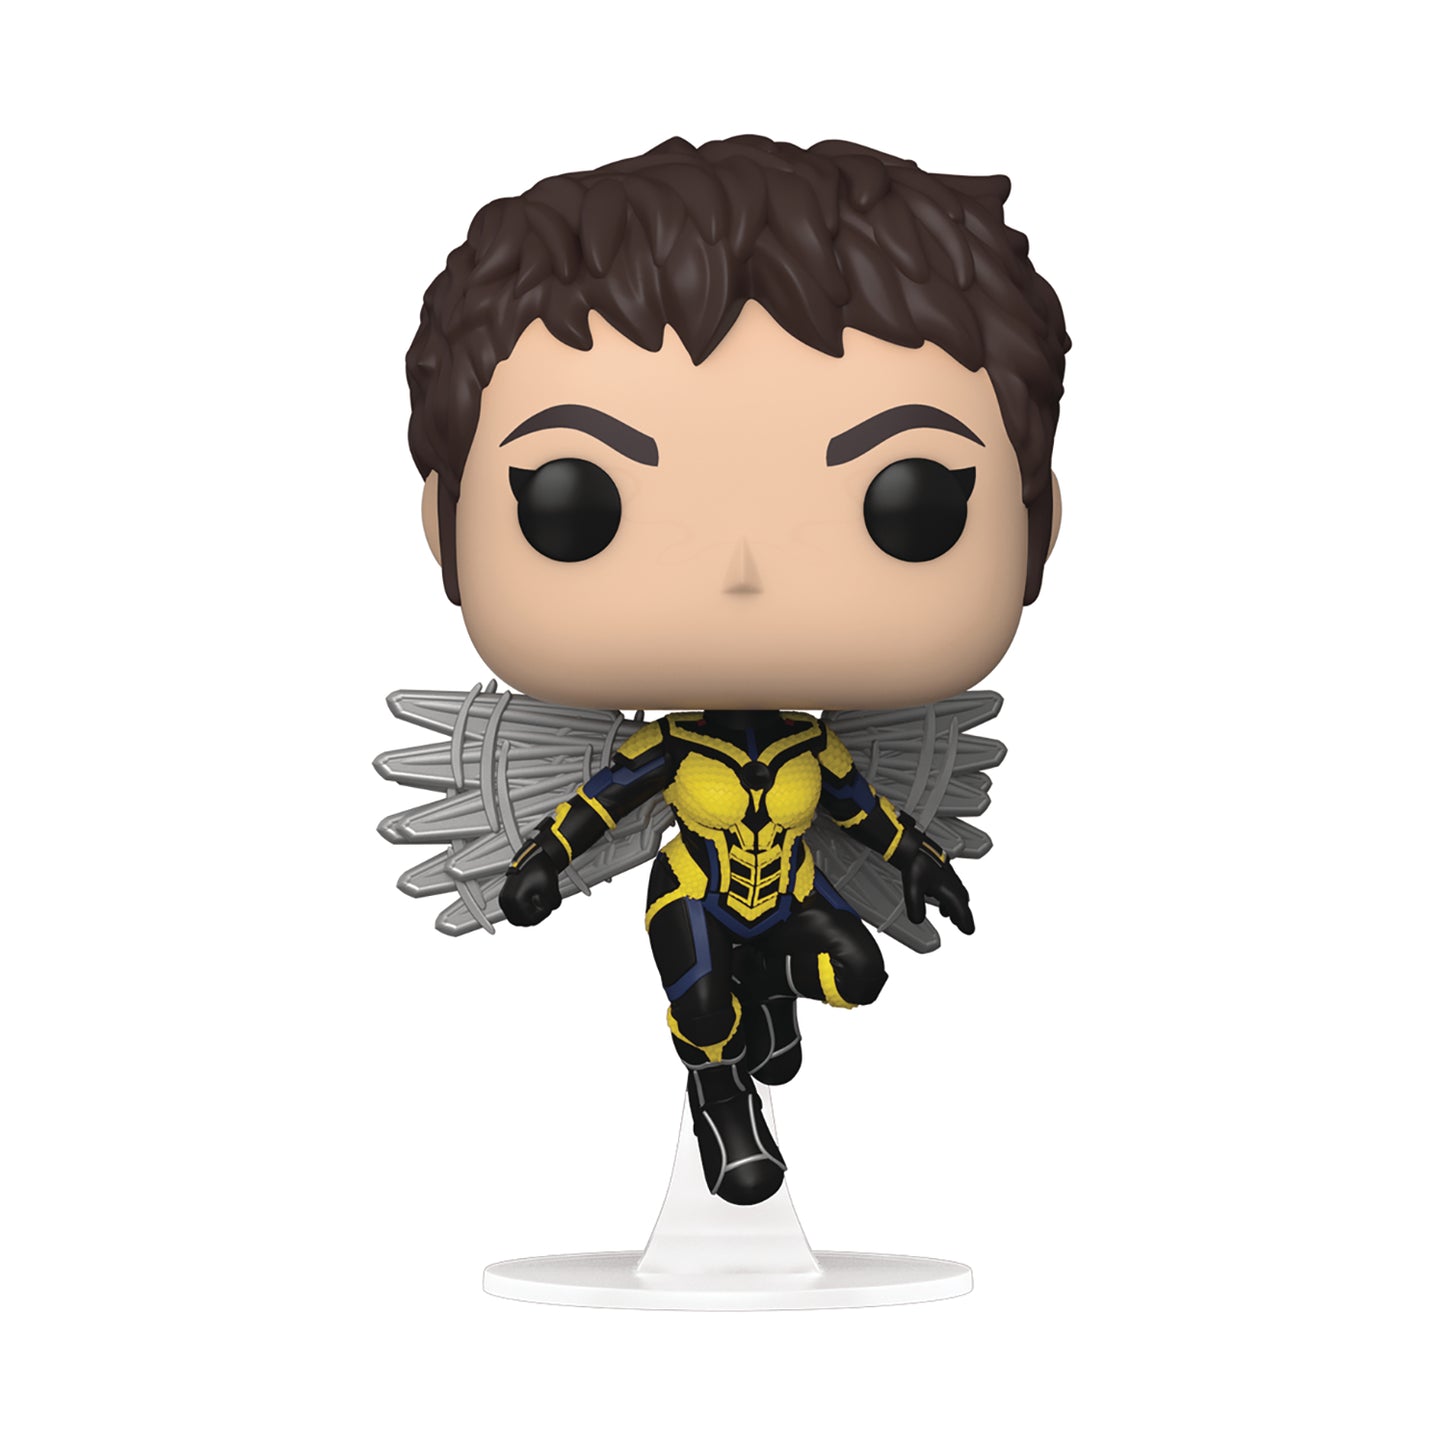 POP! Ant-Man Quantumania Wasp Vinyl Figure (Chase Edition)